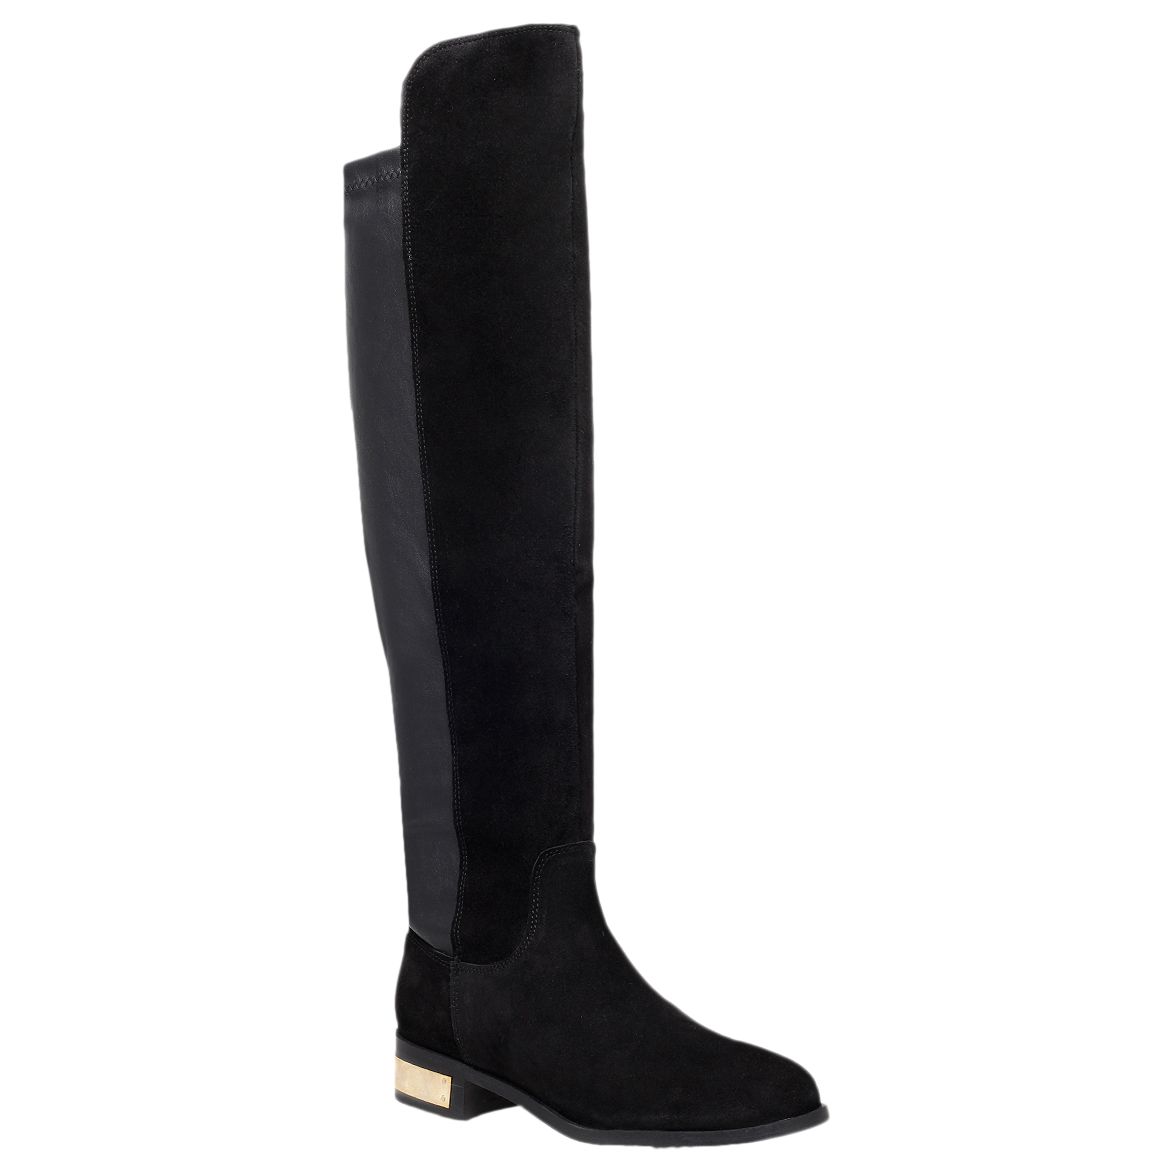 Carvela Pacific Knee High Boots, Black 